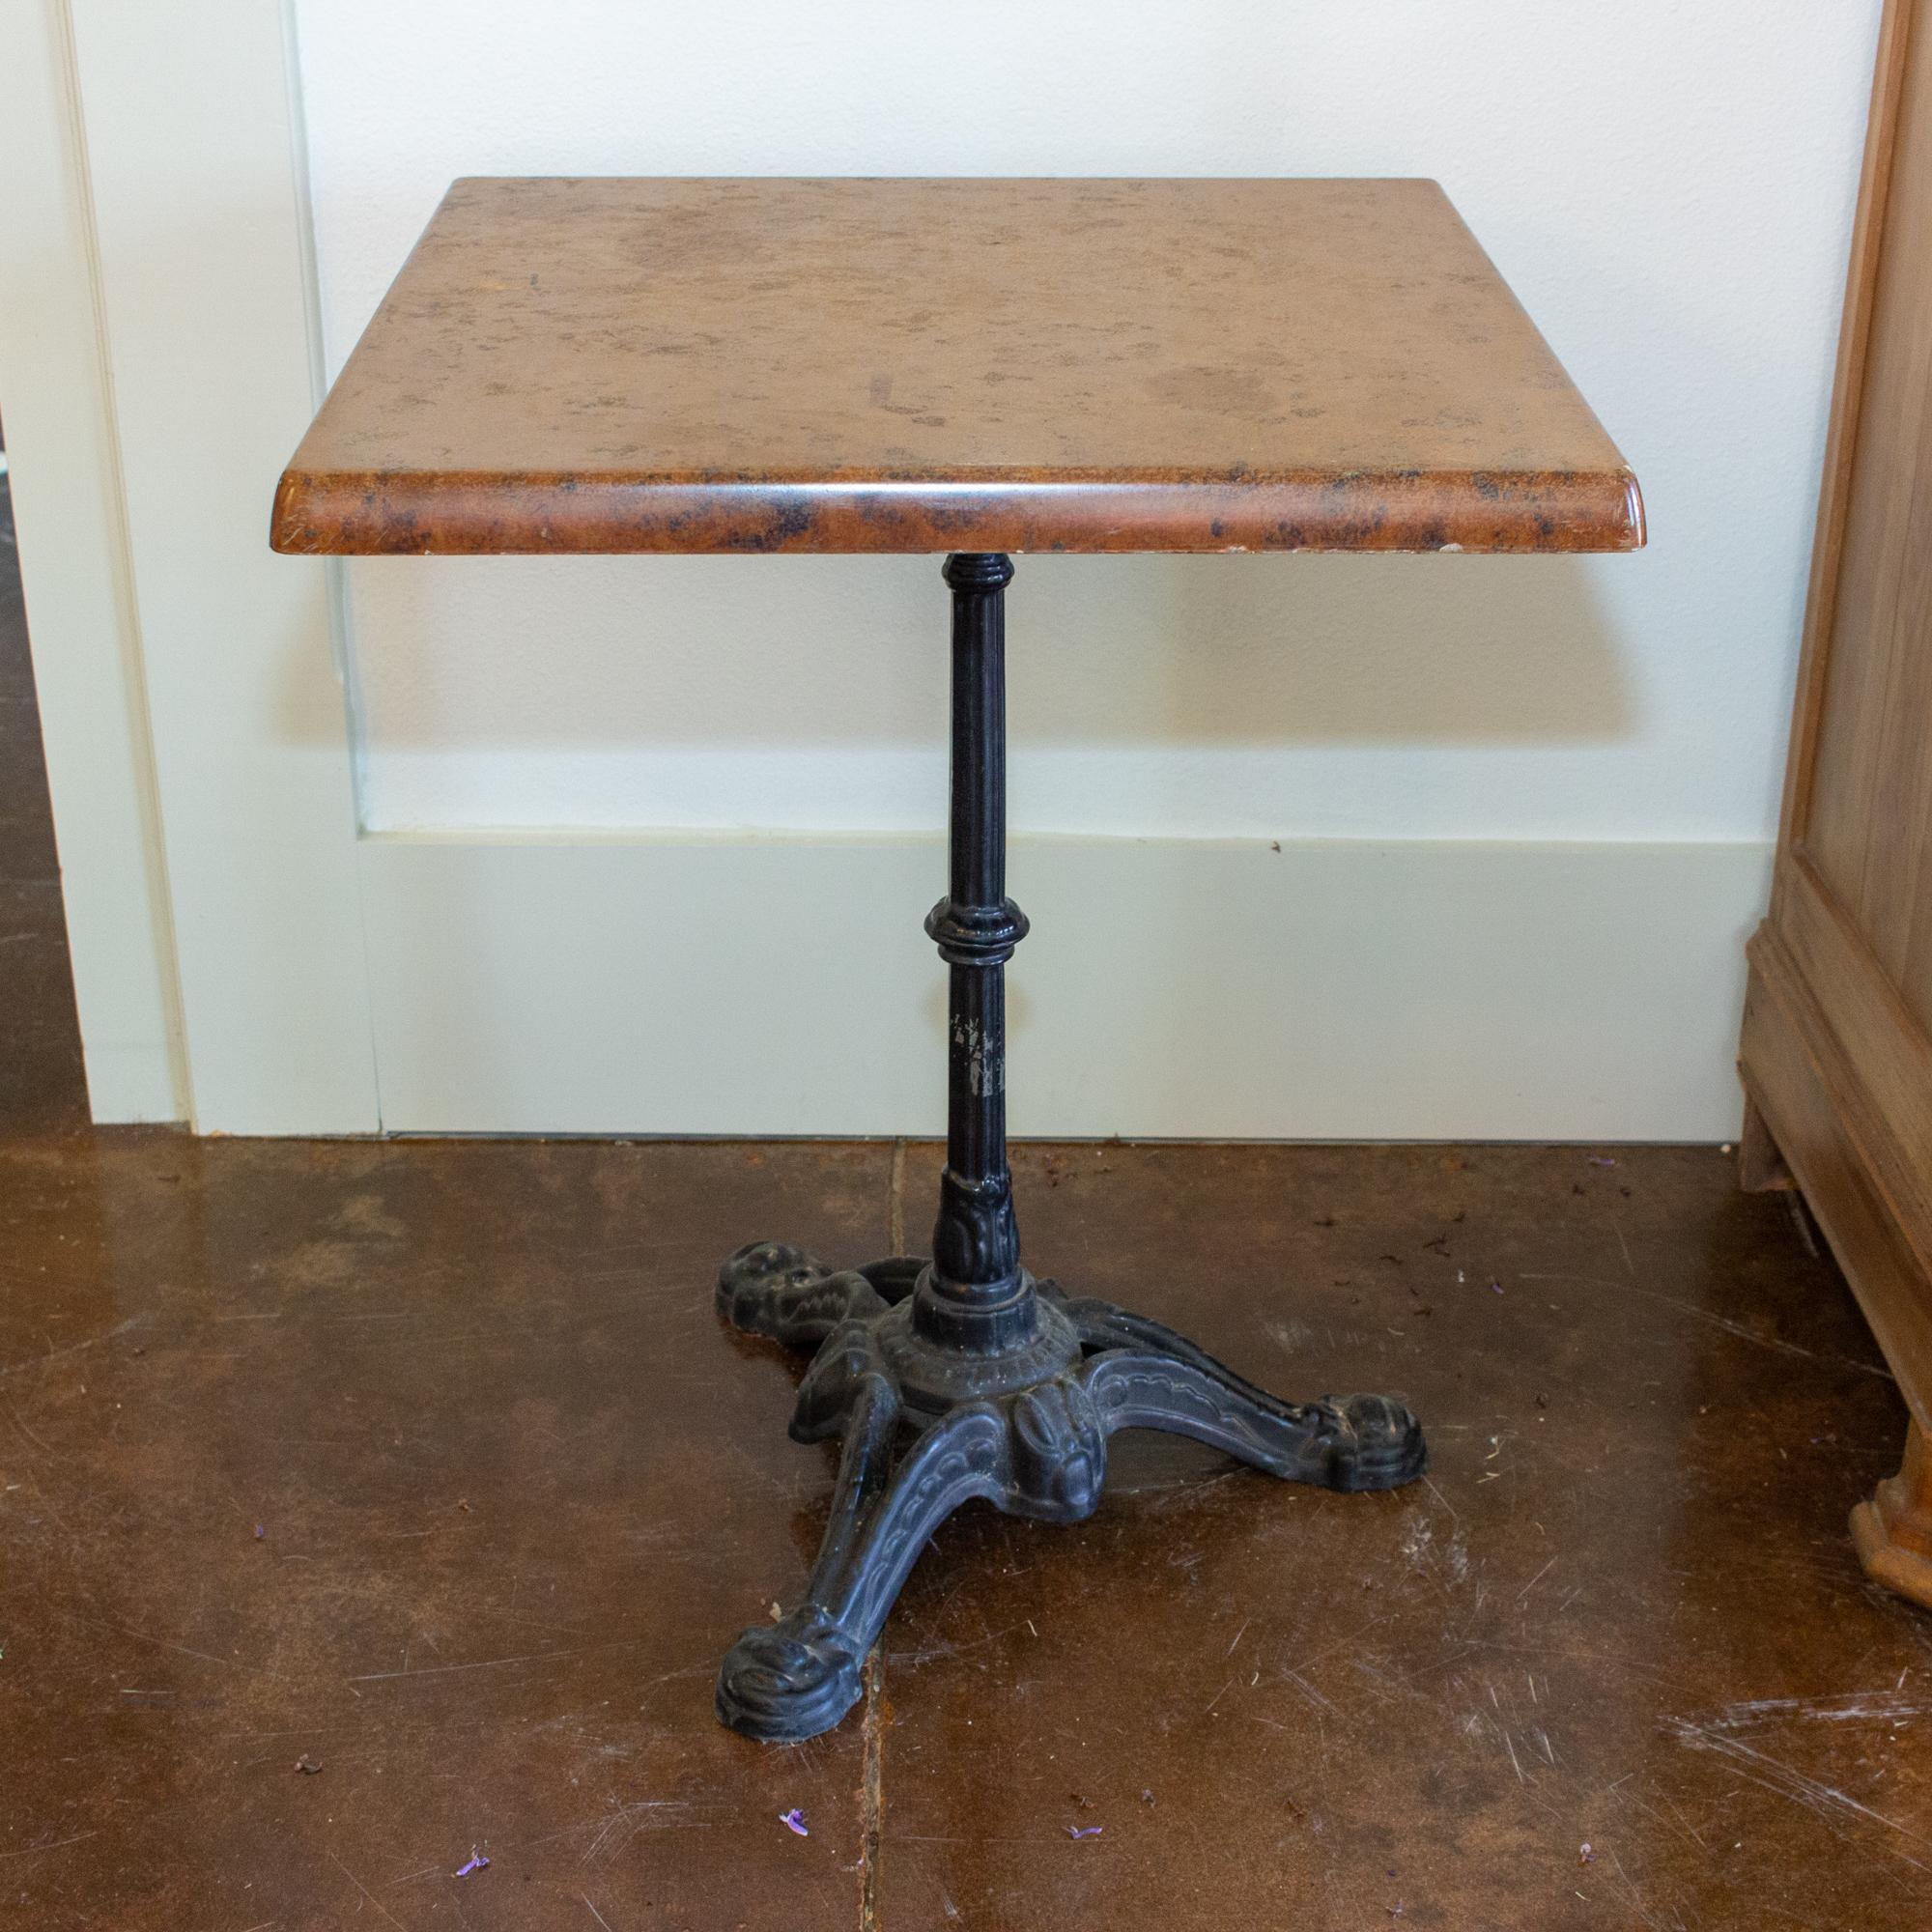 Each of these vintage French bistro tables has a black cast iron base with a square top. The tops appear to be moulded fiberglass with a faux stone design, with flared edges that mimic finished marble in a warm sienna tone. The stylized three-foot